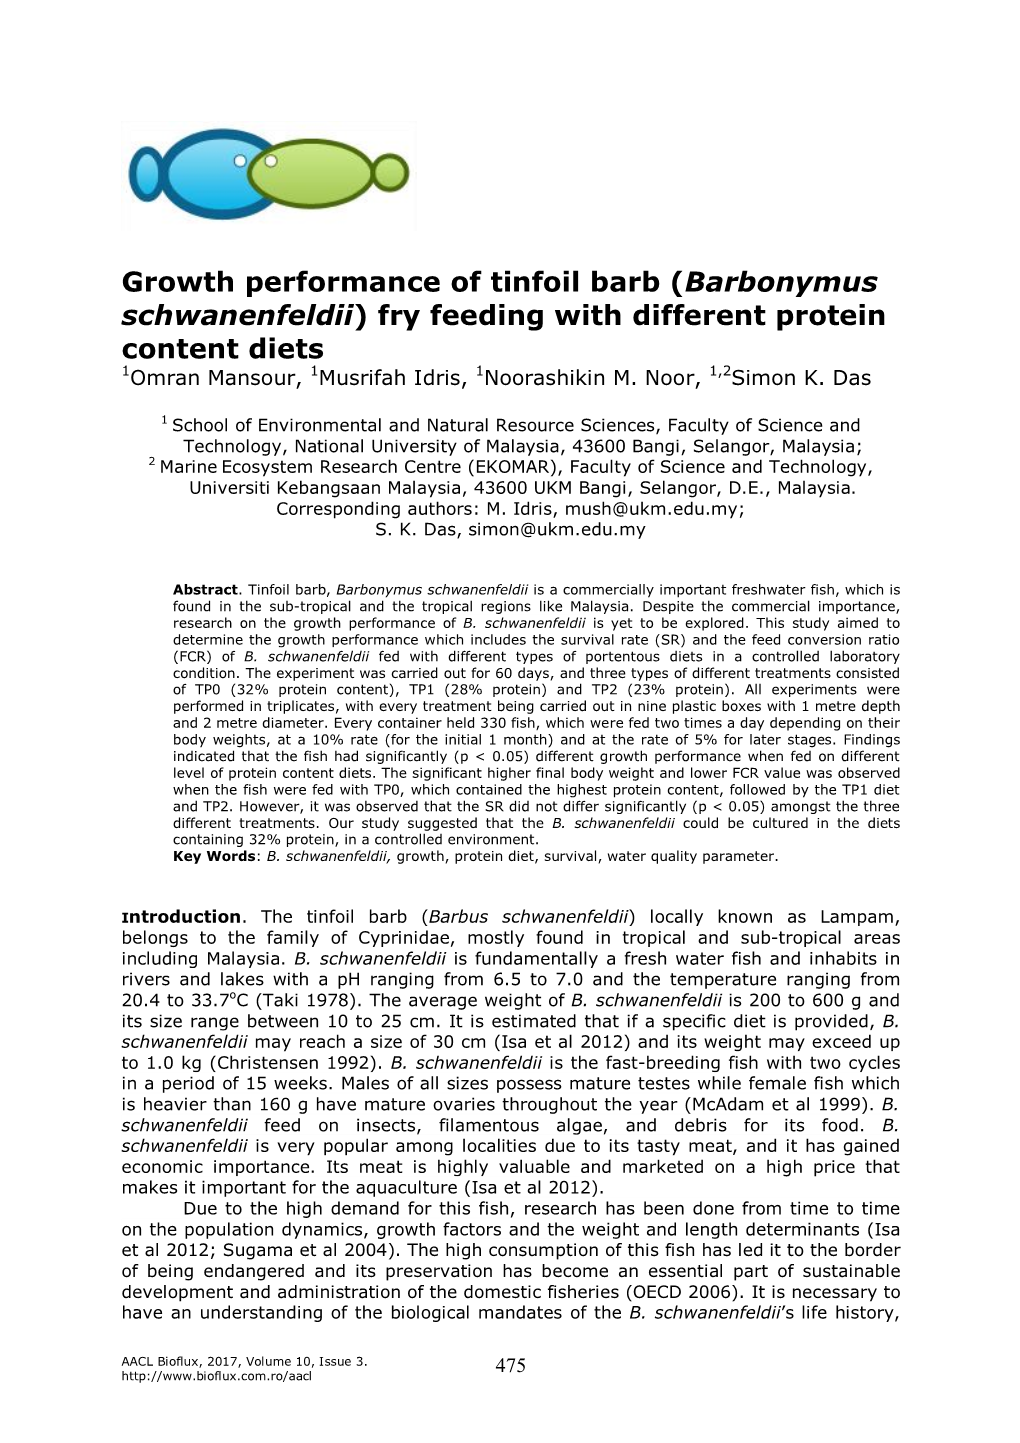 Growth Performance of Tinfoil Barb (Barbonymus Schwanenfeldii) Fry Feeding with Different Protein Content Diets 1Omran Mansour, 1Musrifah Idris, 1Noorashikin M